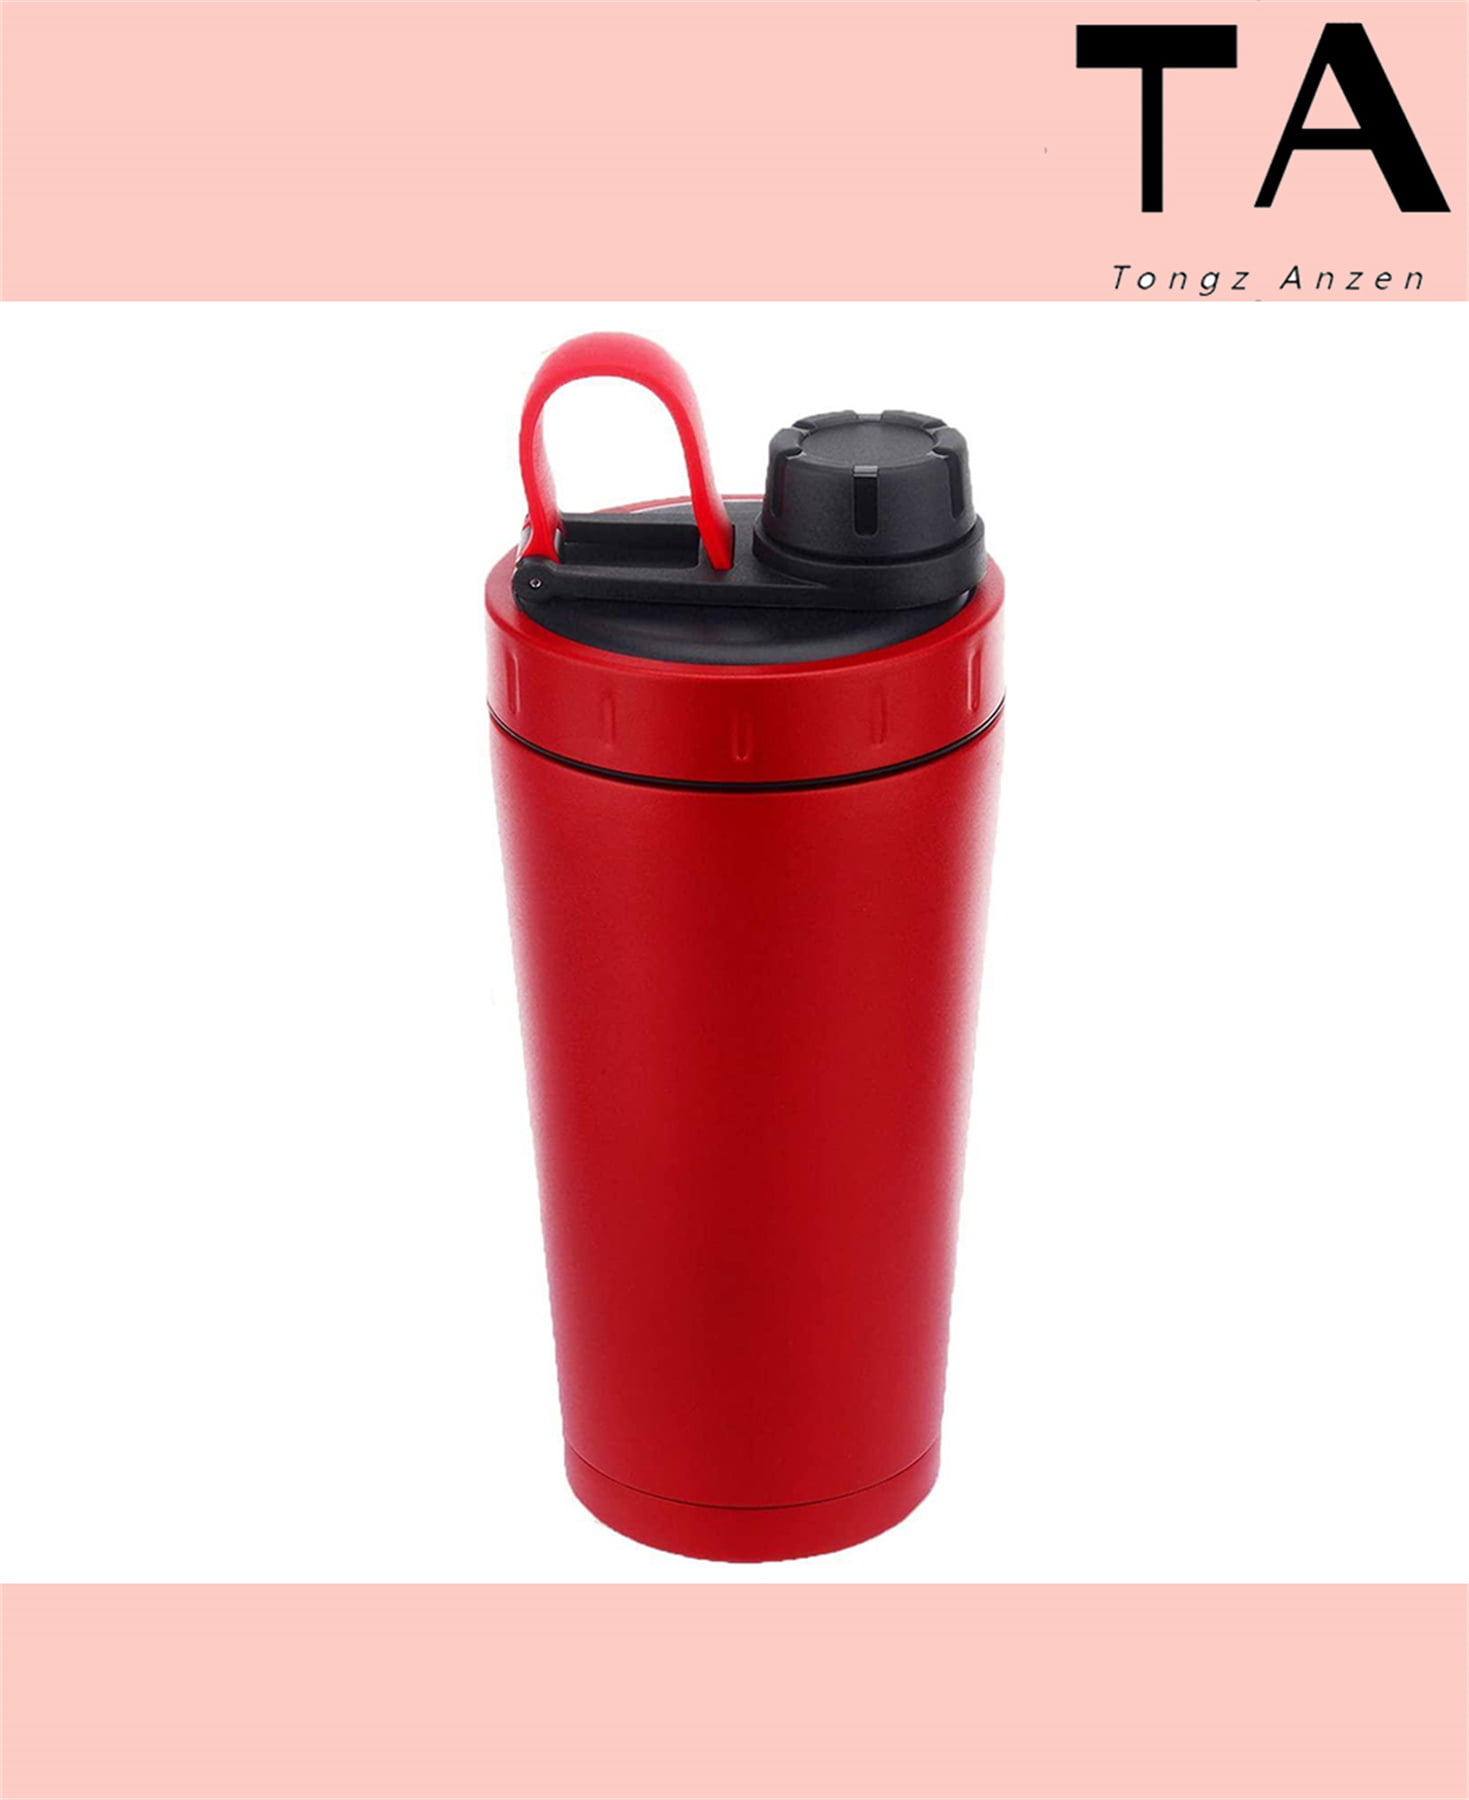 Hydro Flair Stainless Steel Protein Shaker Bottle Insulated Keeps